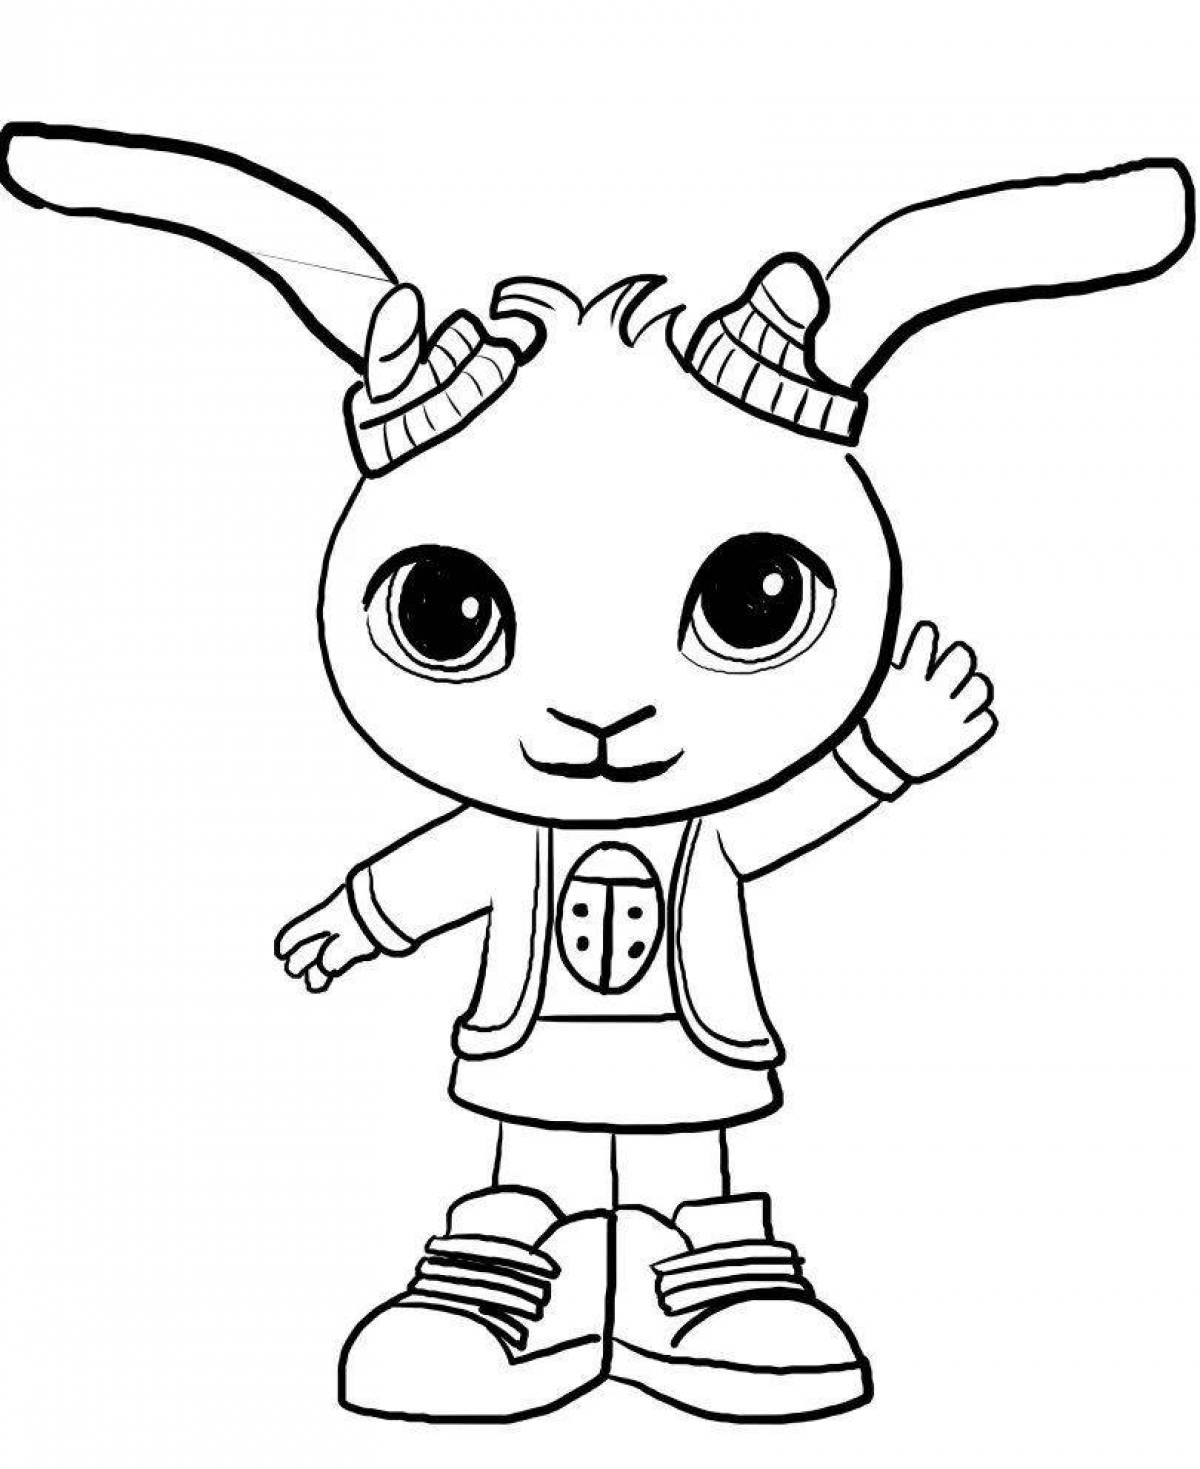 Bing the festive bunny coloring page